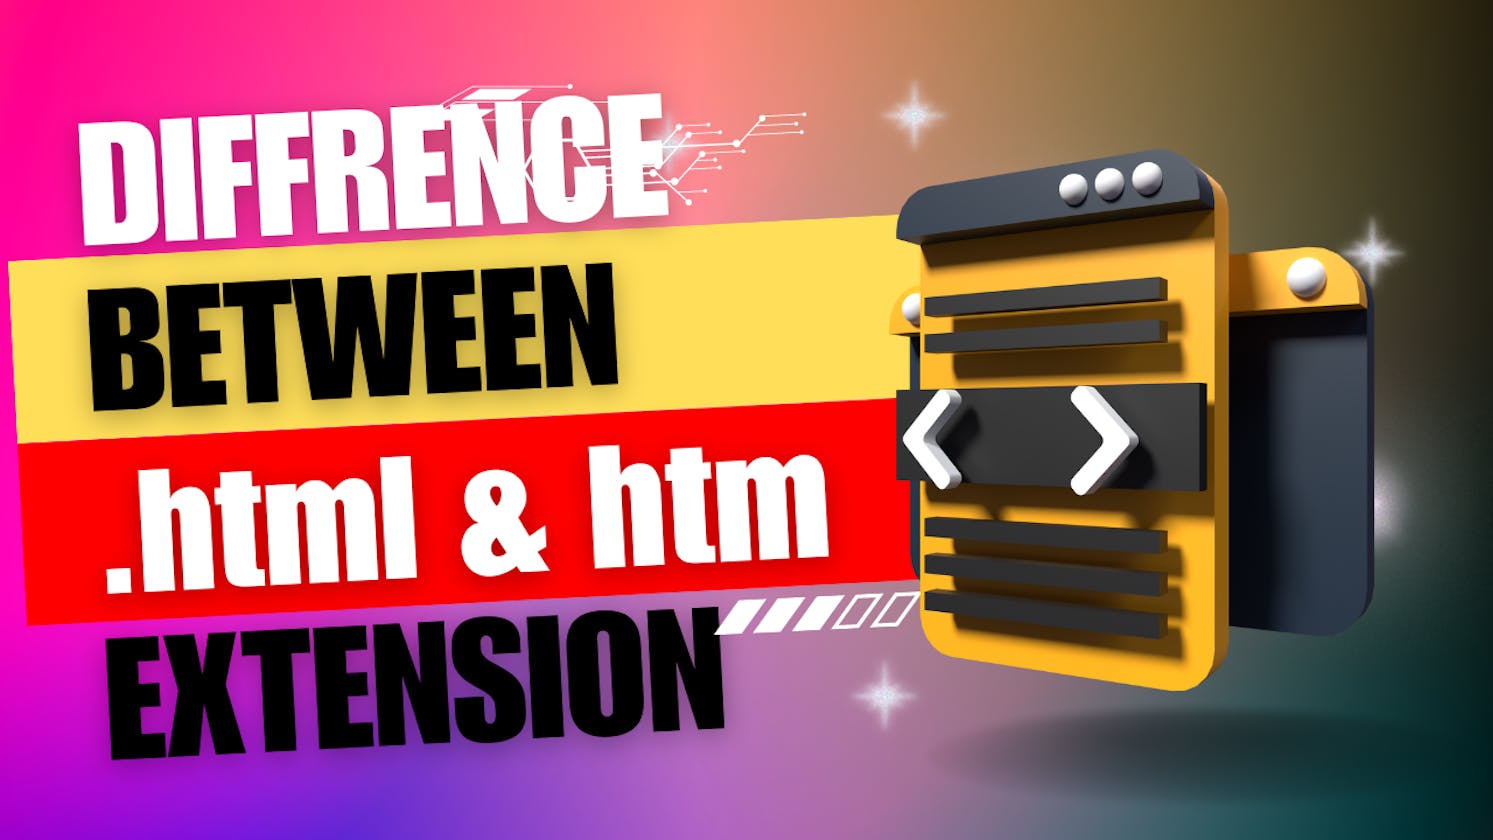 What is Difference Between .html & .htm ?